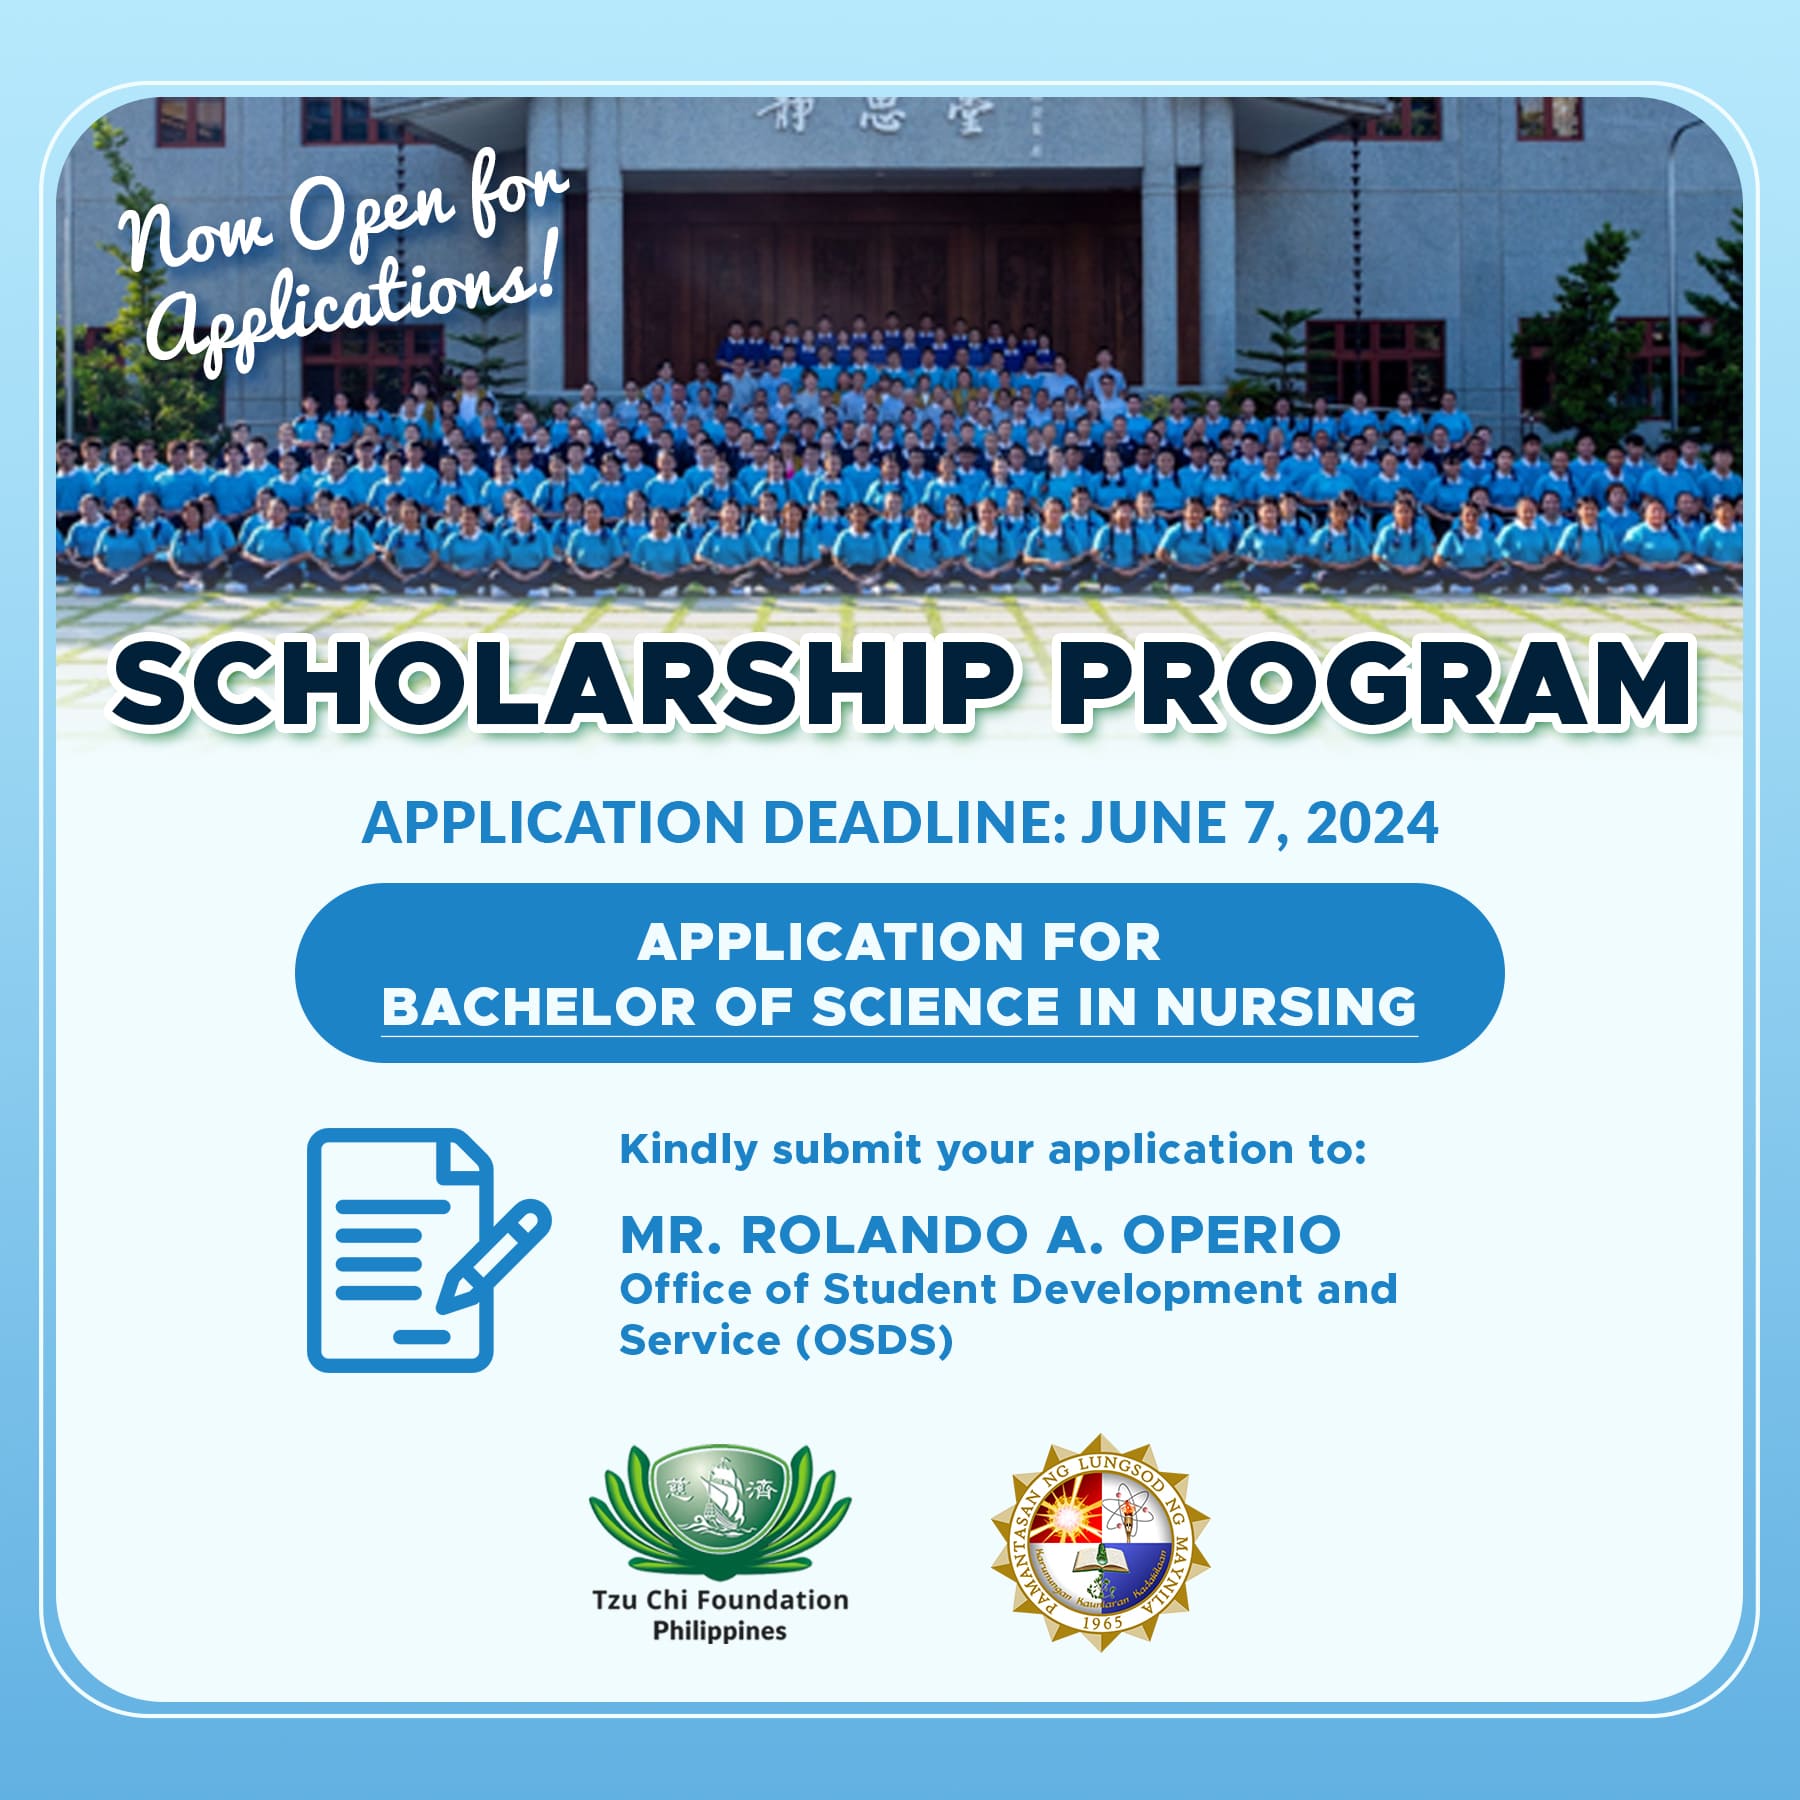 e-poster of Tzu Chi Foundation for the BS Nursing scholarship application.